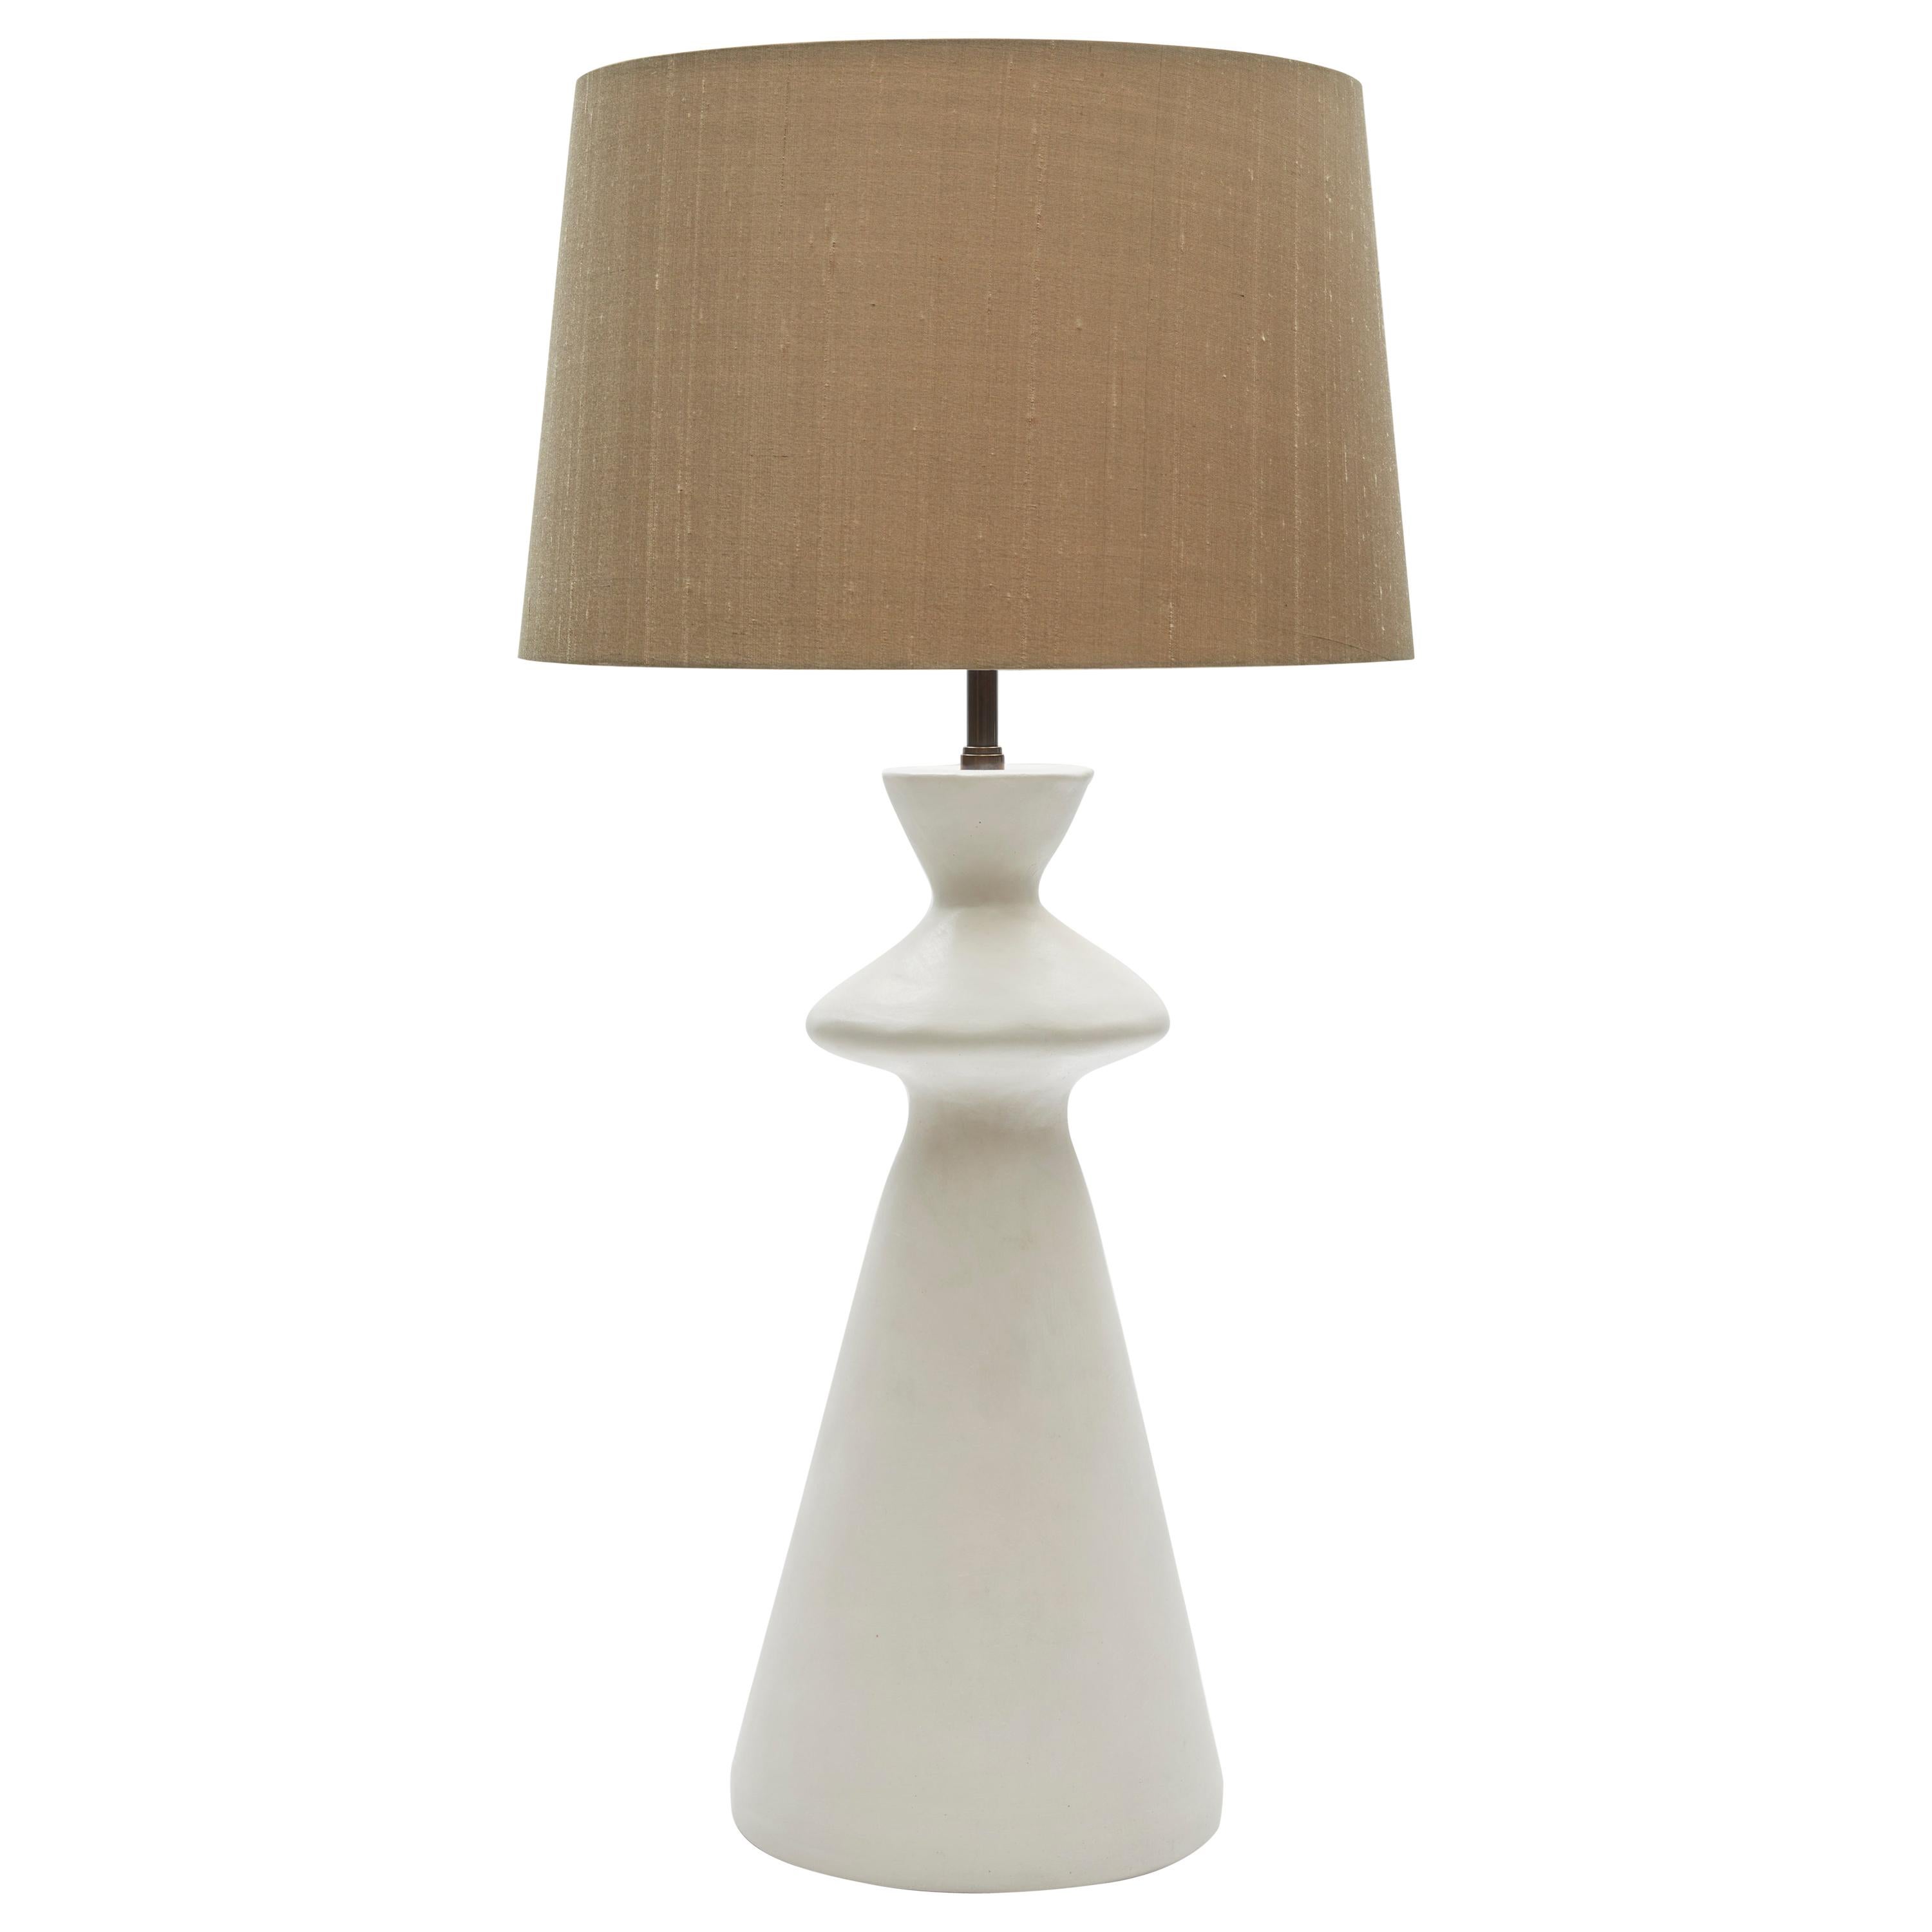 Sculptural Plaster Table Lamp Hand Made in UK Contemporary 21st Century For Sale